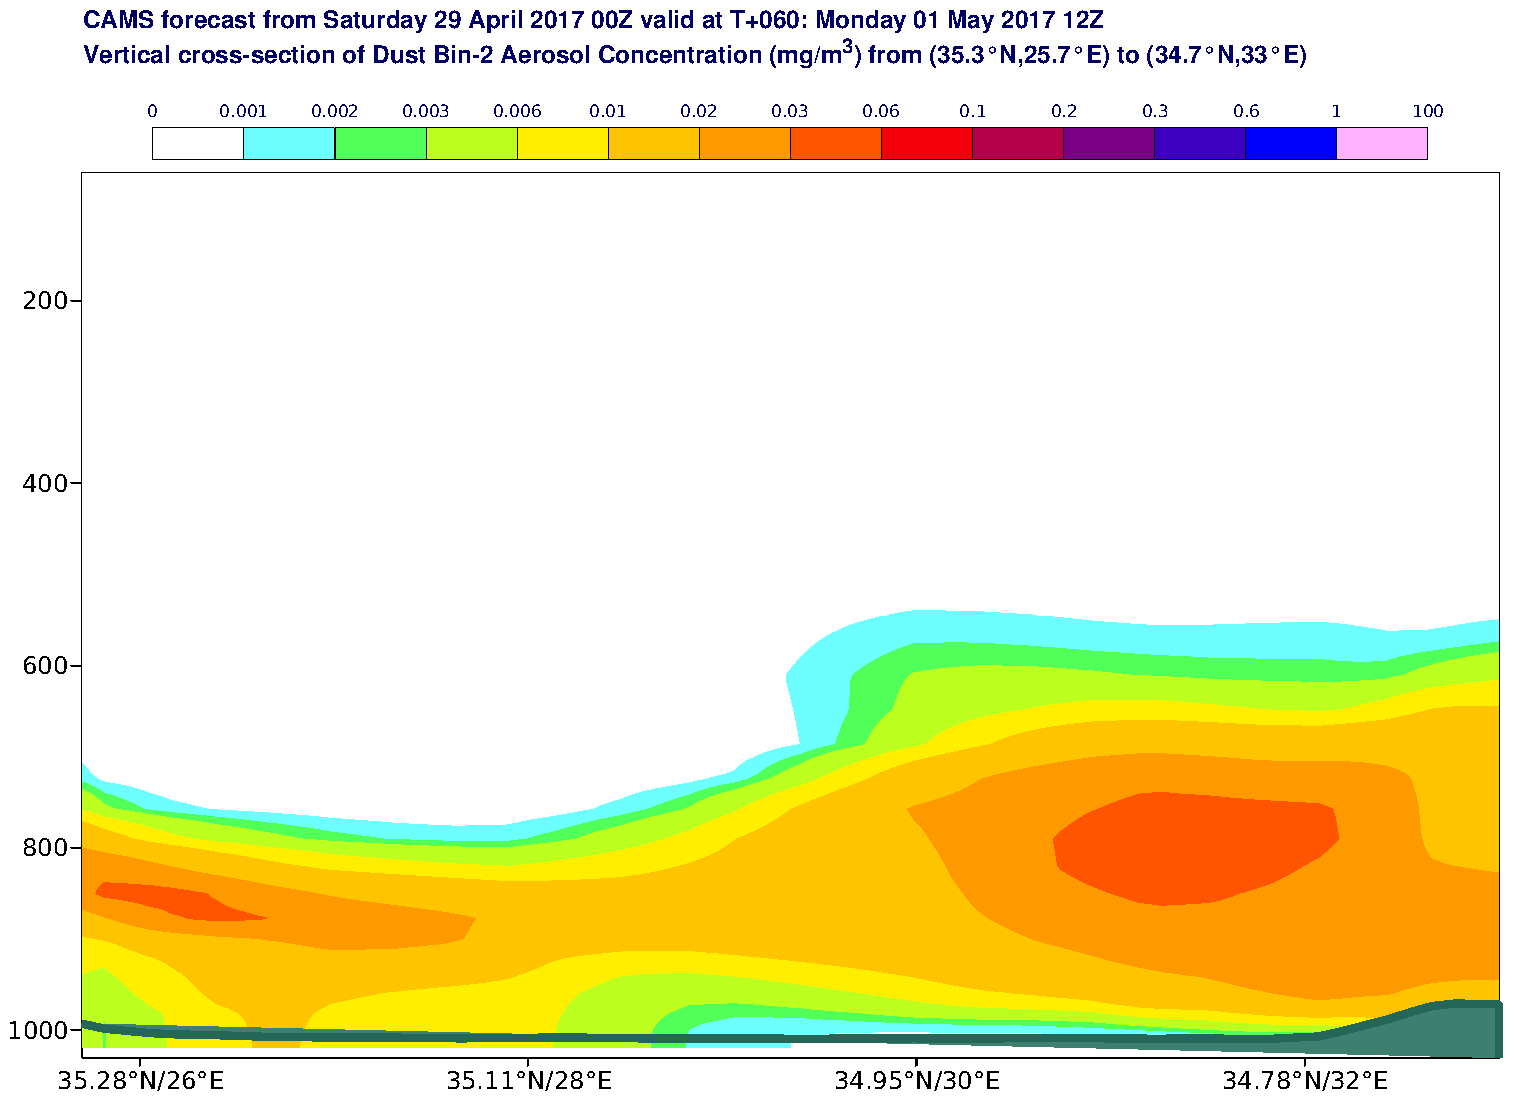 Vertical cross-section of Dust Bin-2 Aerosol Concentration (mg/m3) valid at T60 - 2017-05-01 12:00